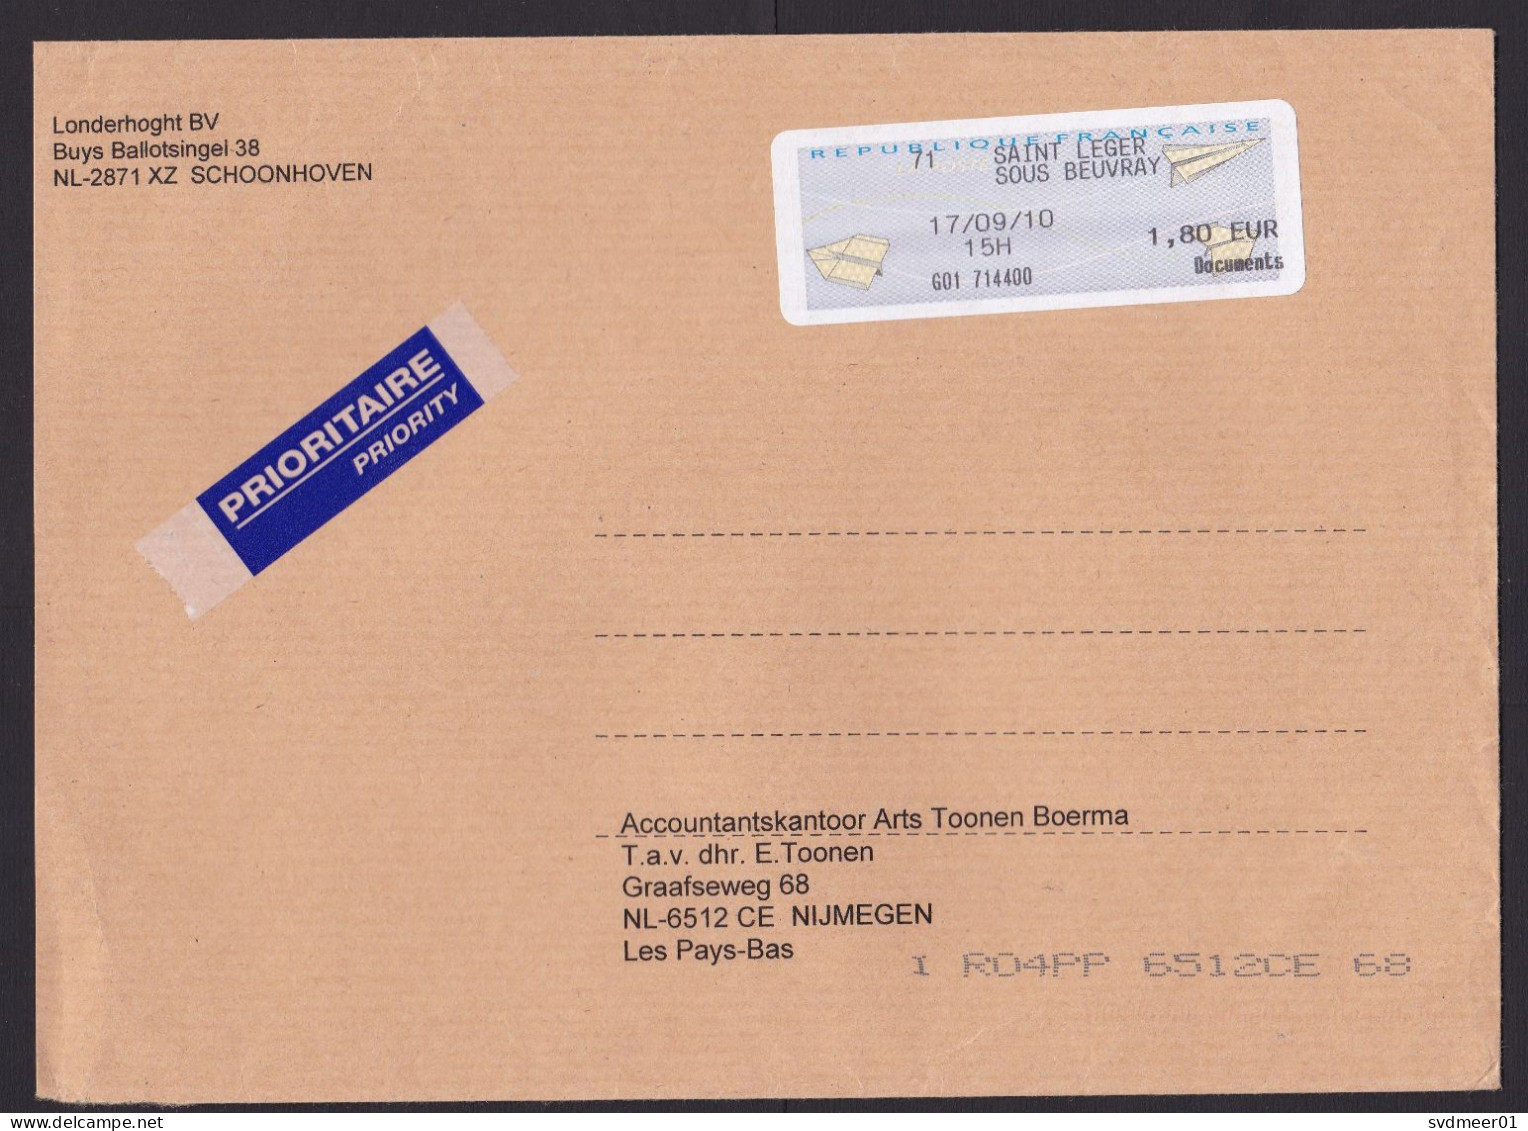 France: Priority Cover To Netherlands, 2010, ATM Machine Label, 1.80 Documents Rate, Saint Leger (traces Of Use) - Cartas & Documentos